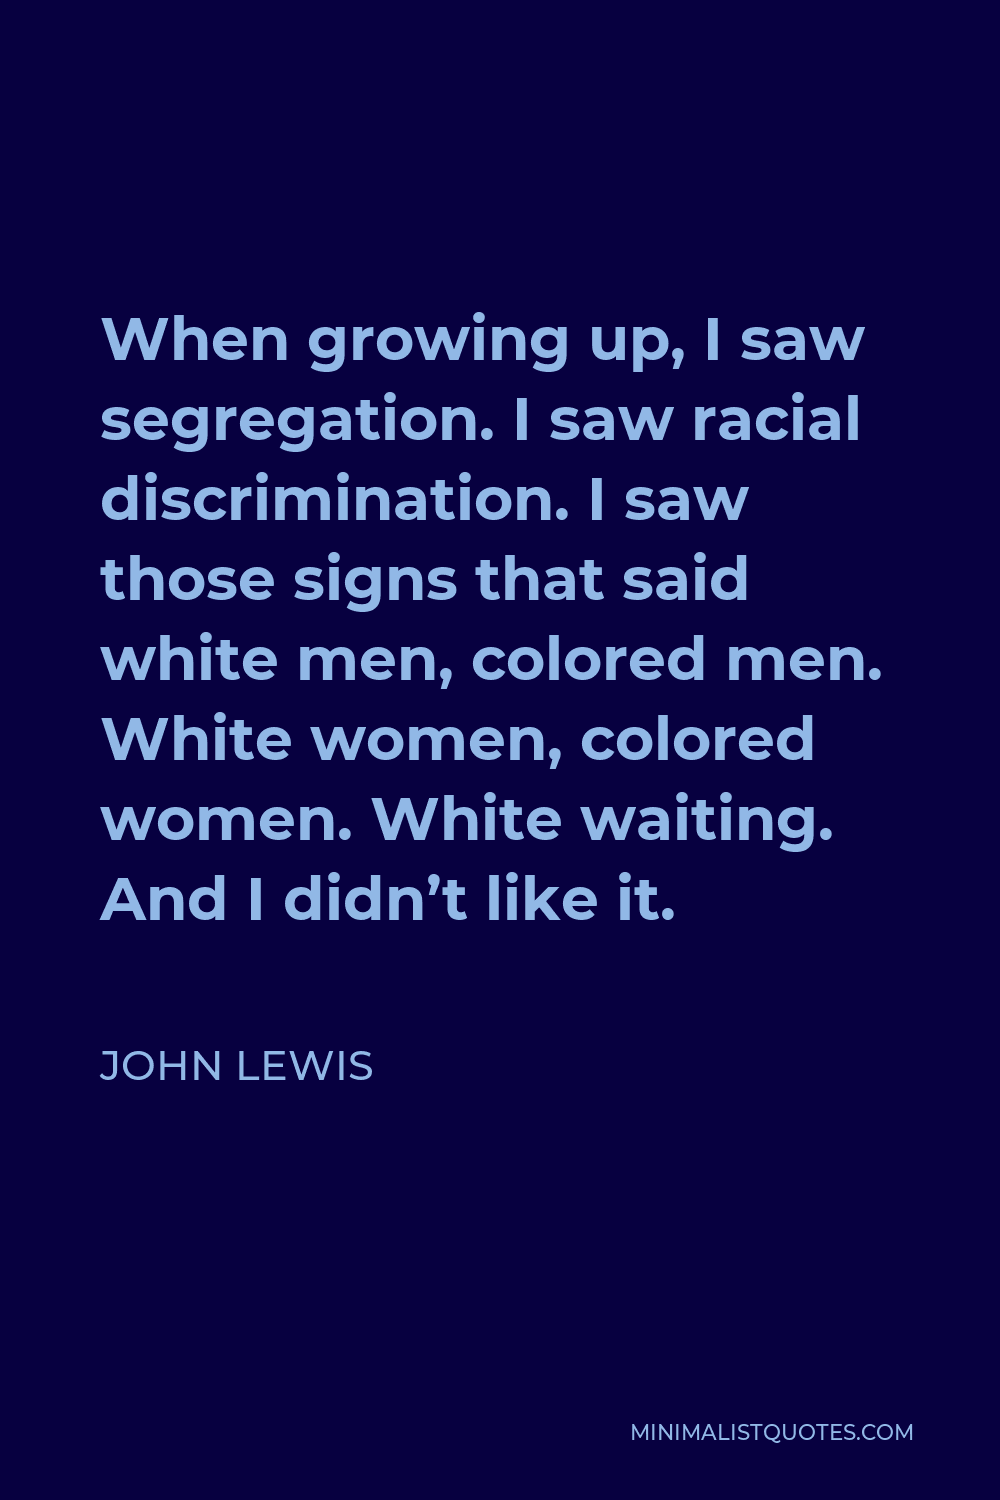 John Lewis Quote - When growing up, I saw segregation. I saw racial discrimination. I saw those signs that said white men, colored men. White women, colored women. White waiting. And I didn’t like it.